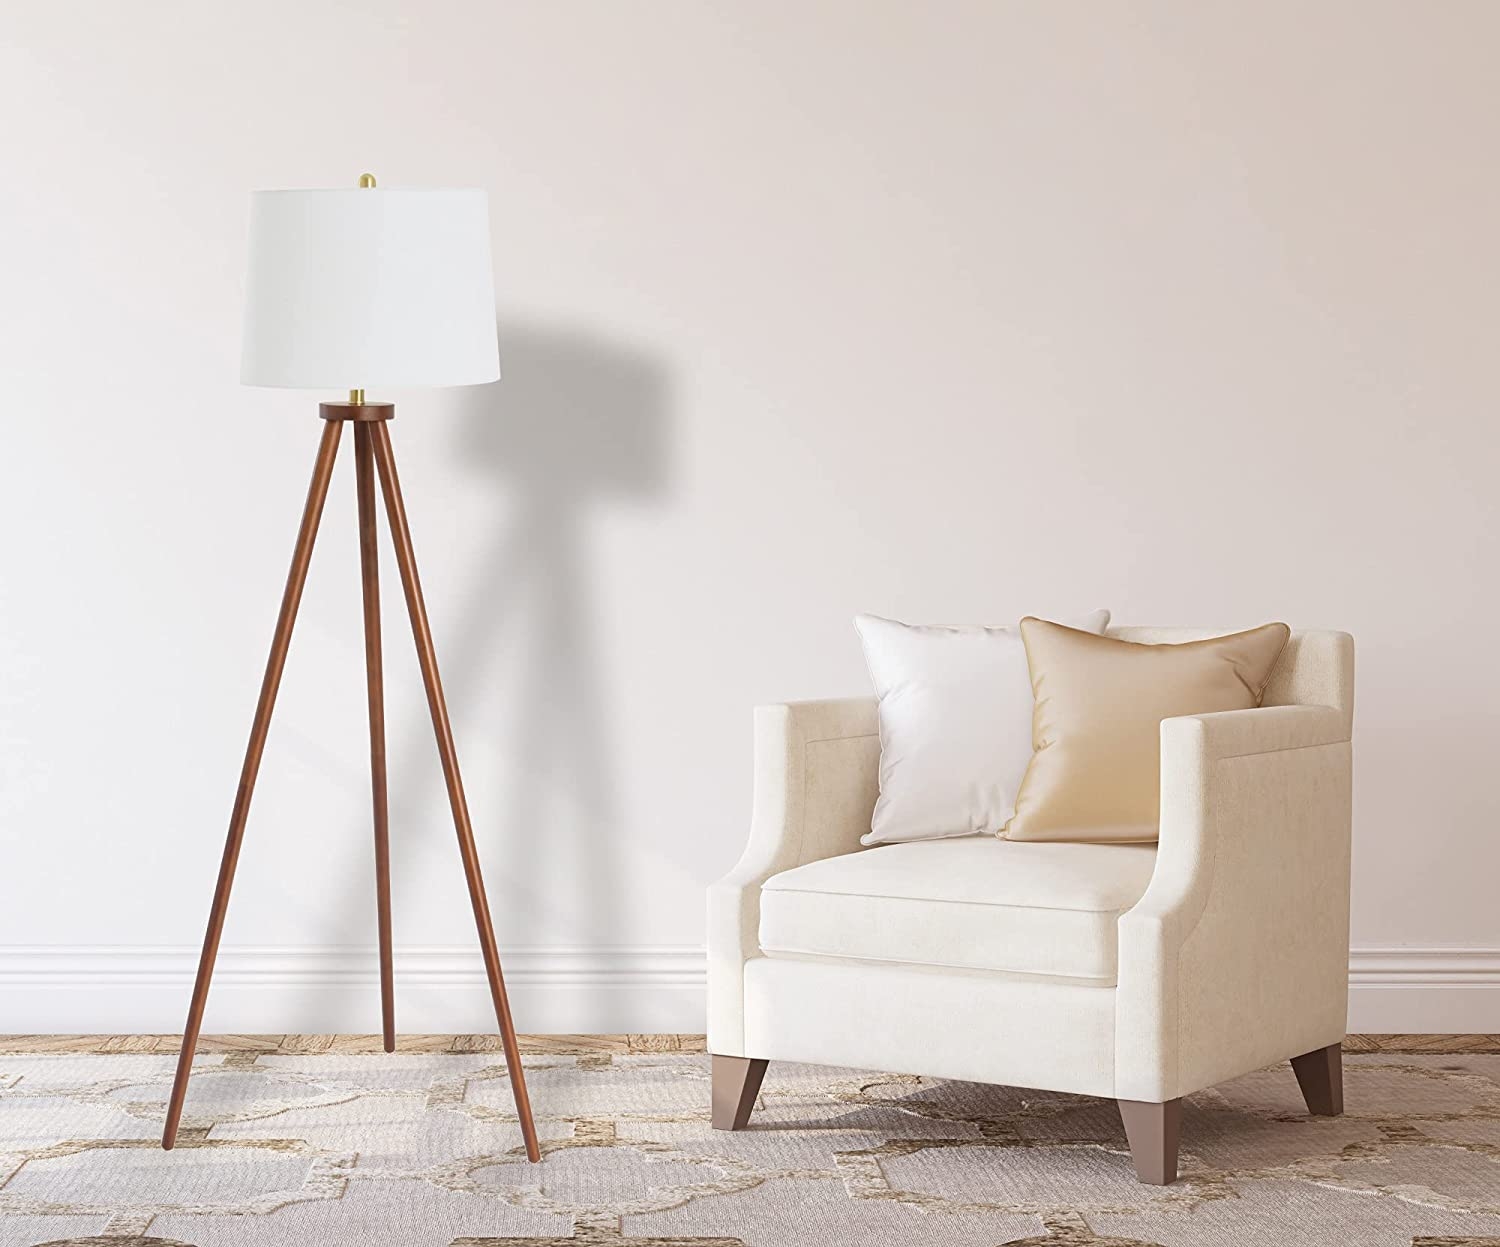 A-Frame Tripod Rubber Wood Floor Lamp with Cream Linen Shade, Espresso - Image 1